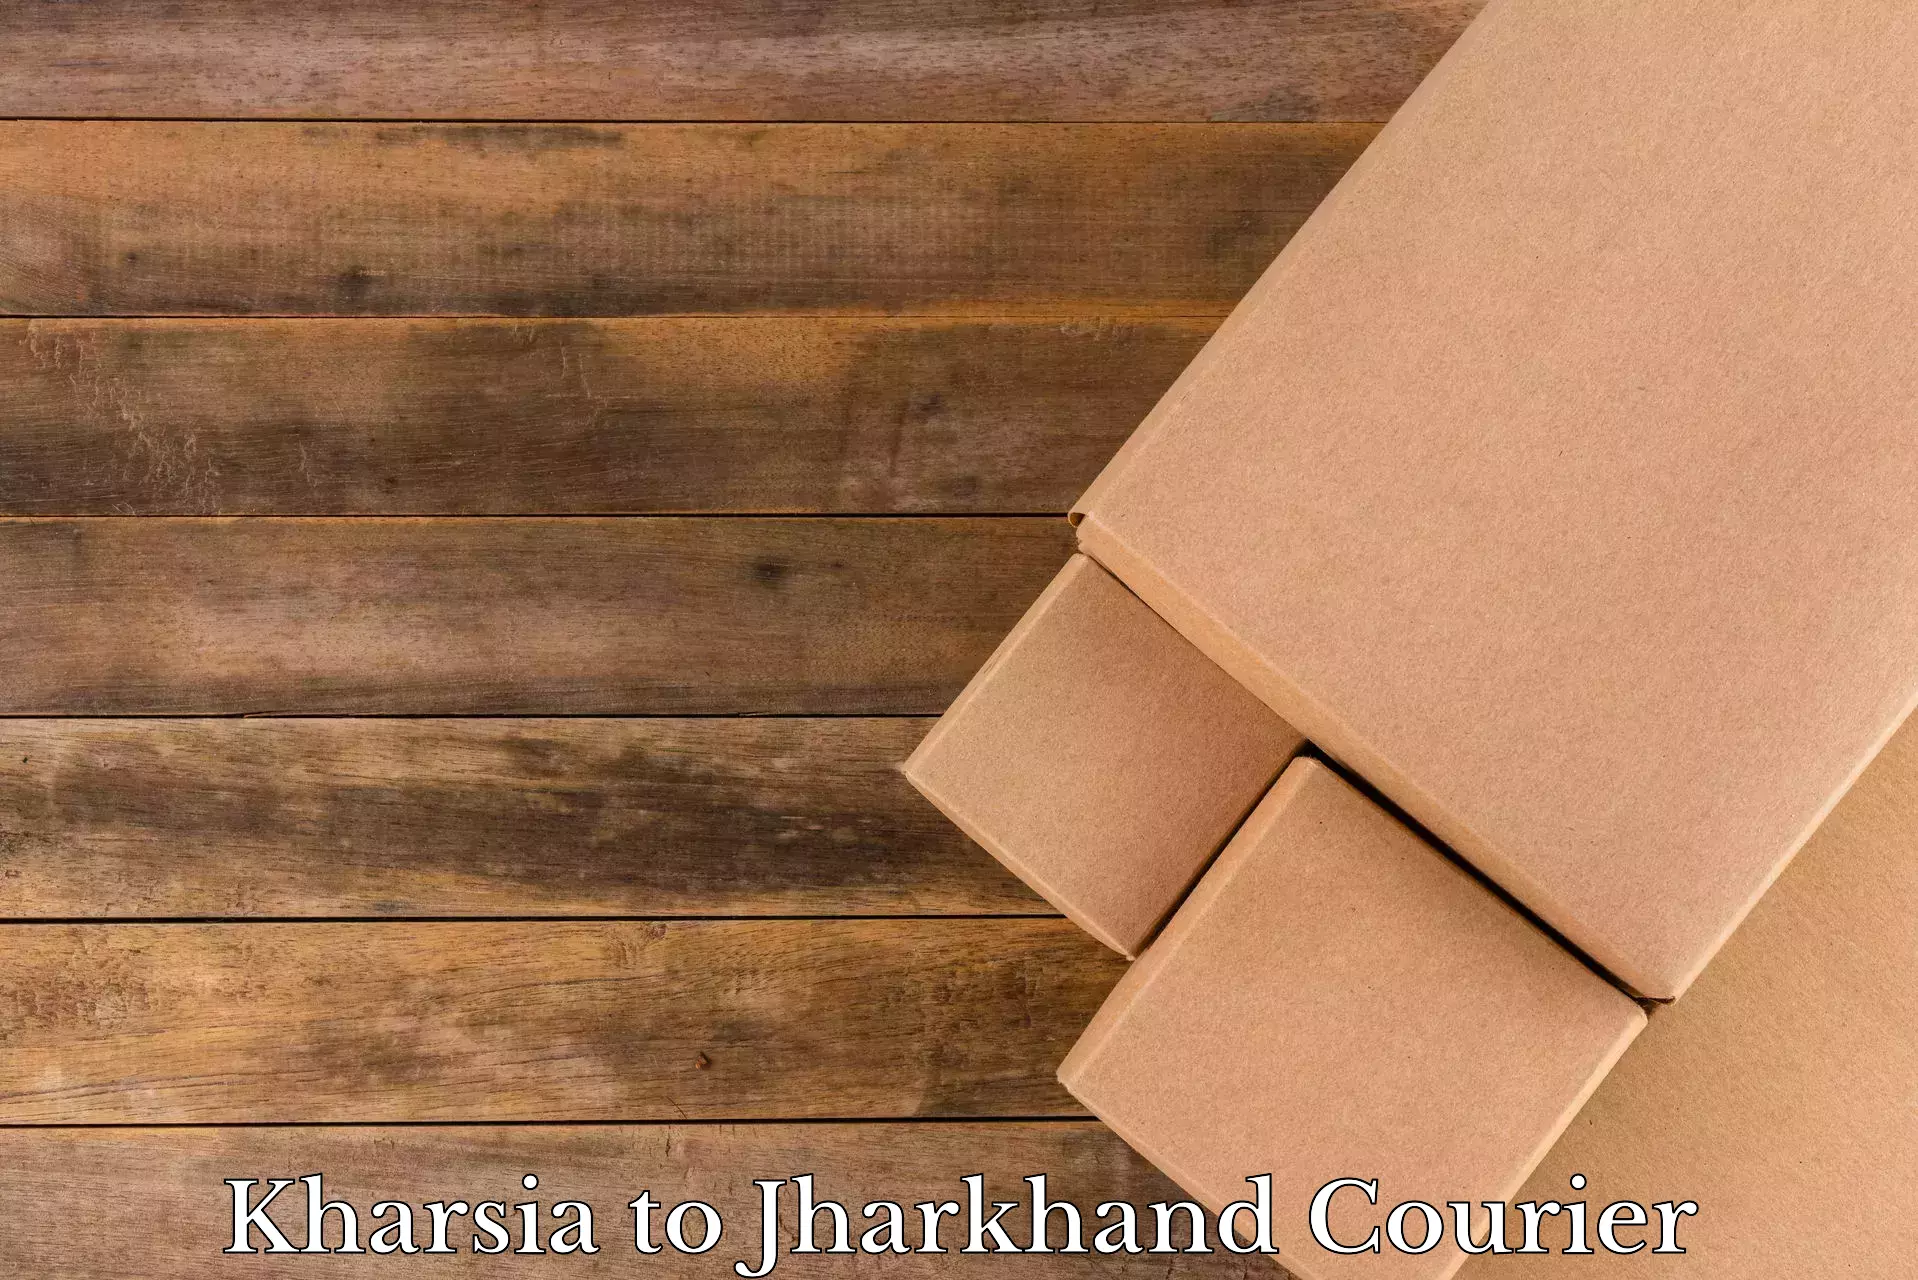 Trusted furniture movers Kharsia to Peterbar